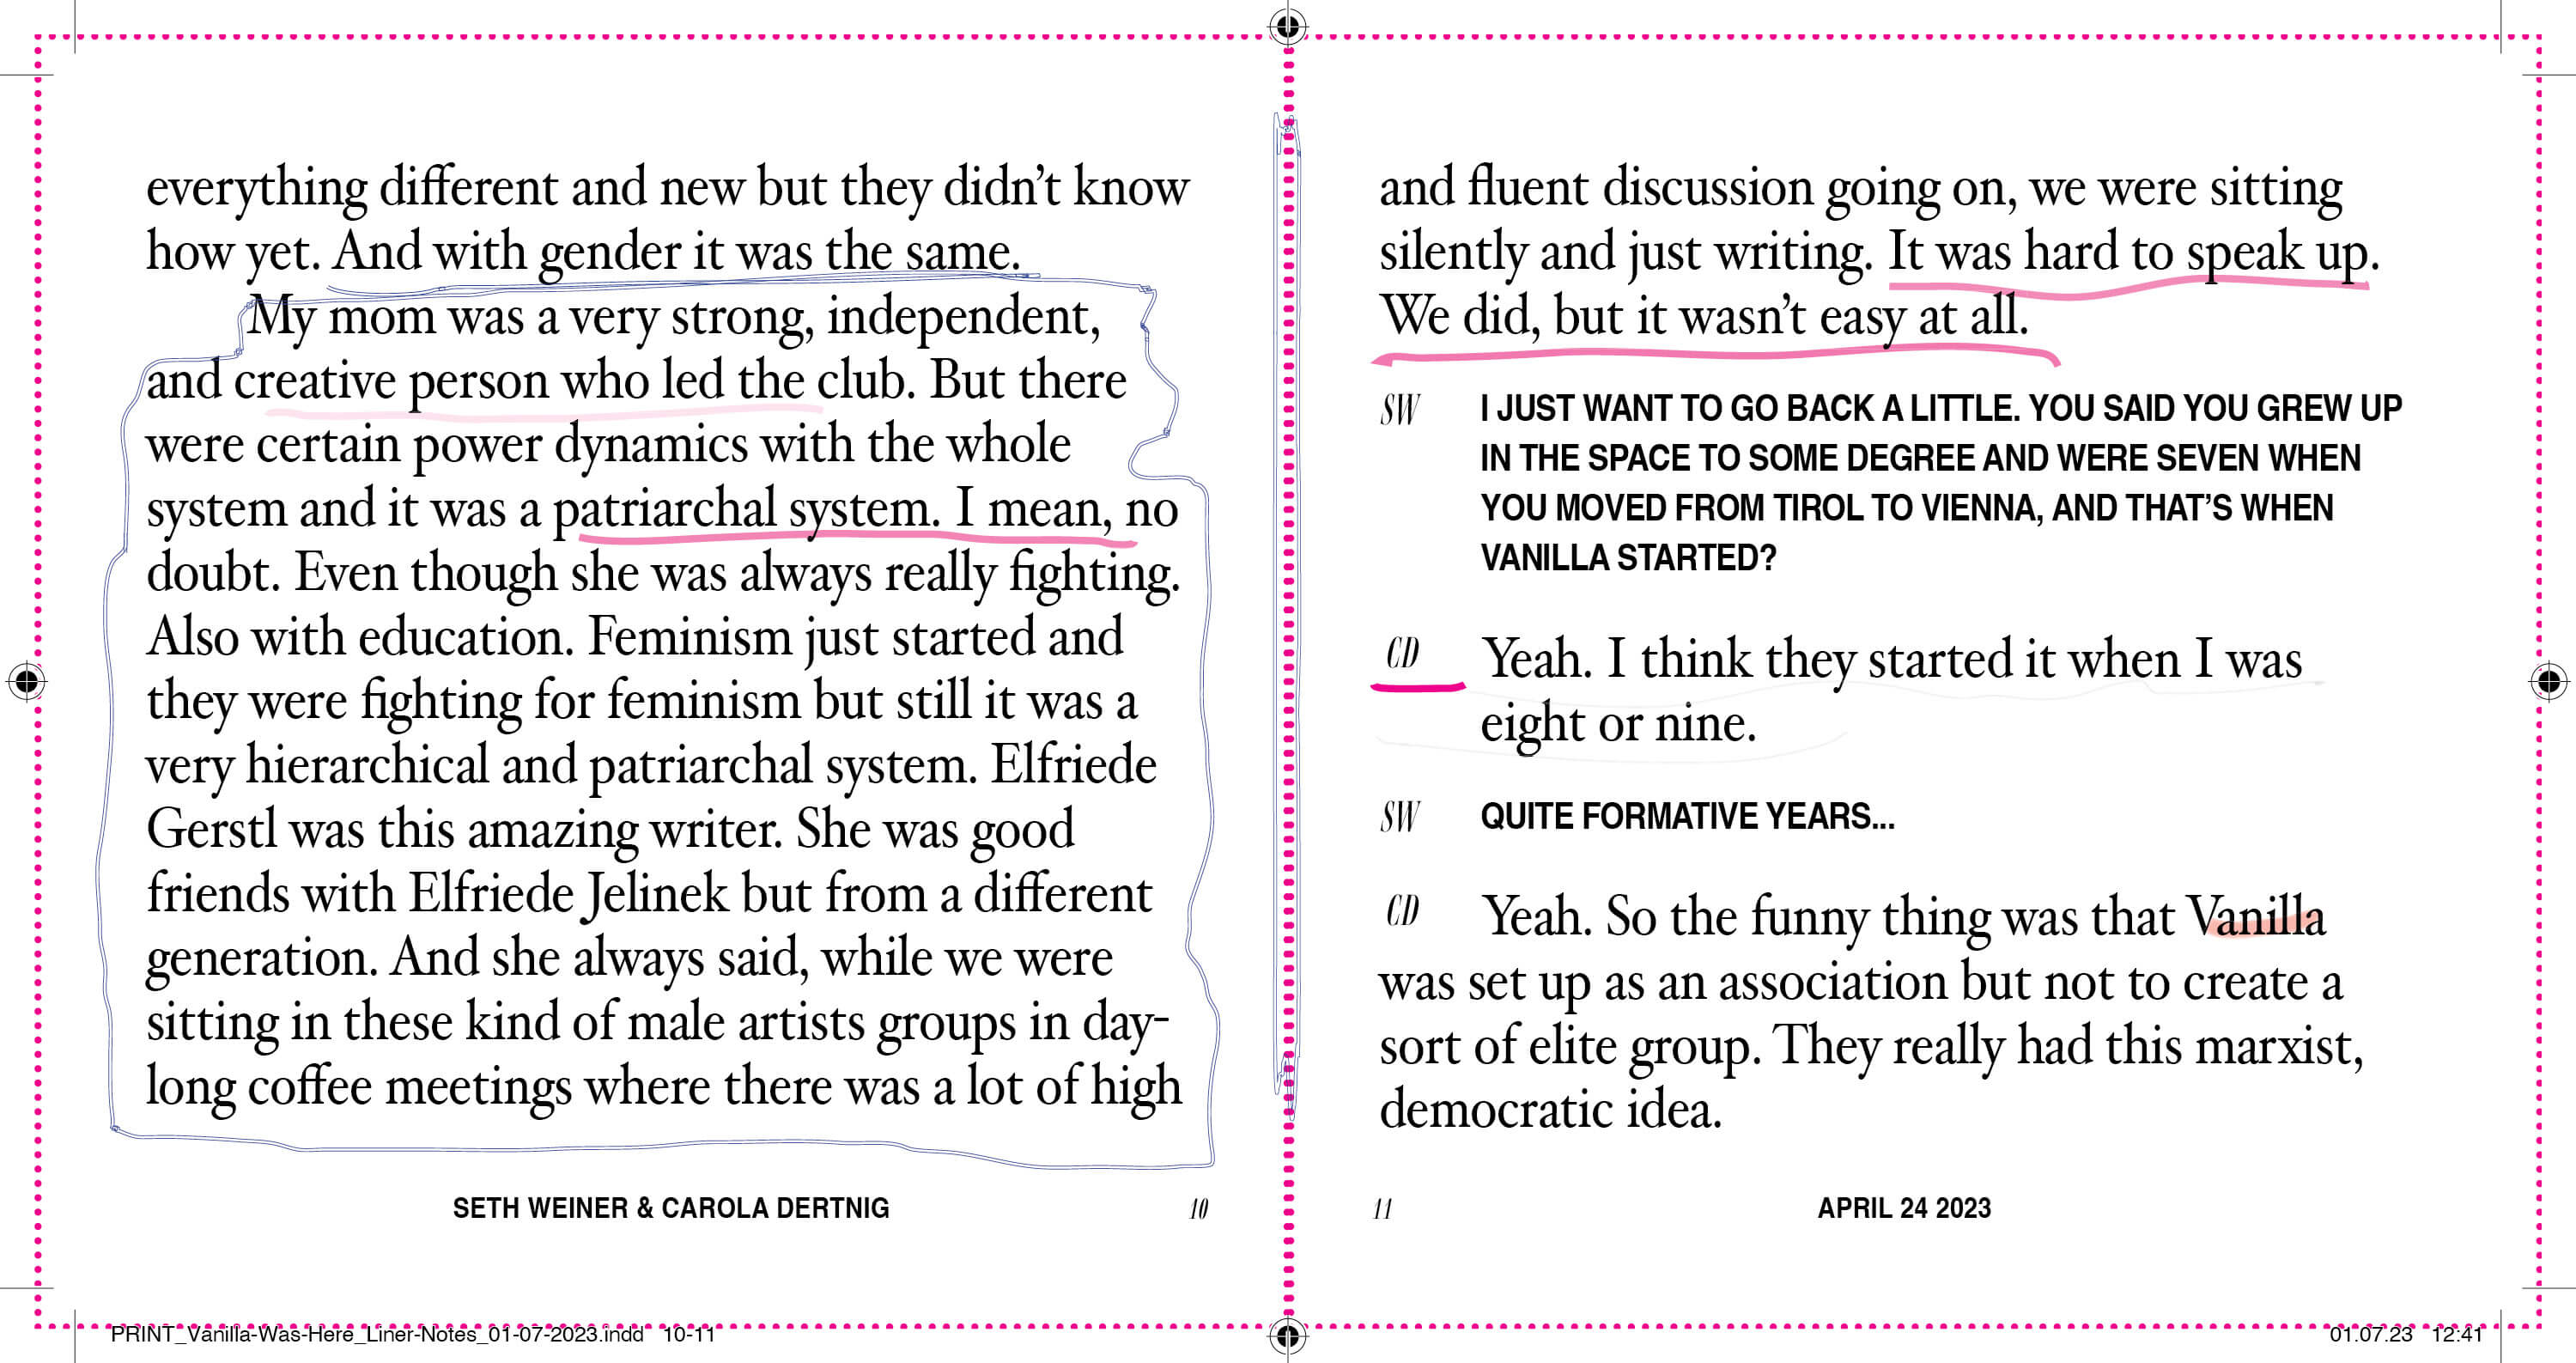 Publication spread with an interview.